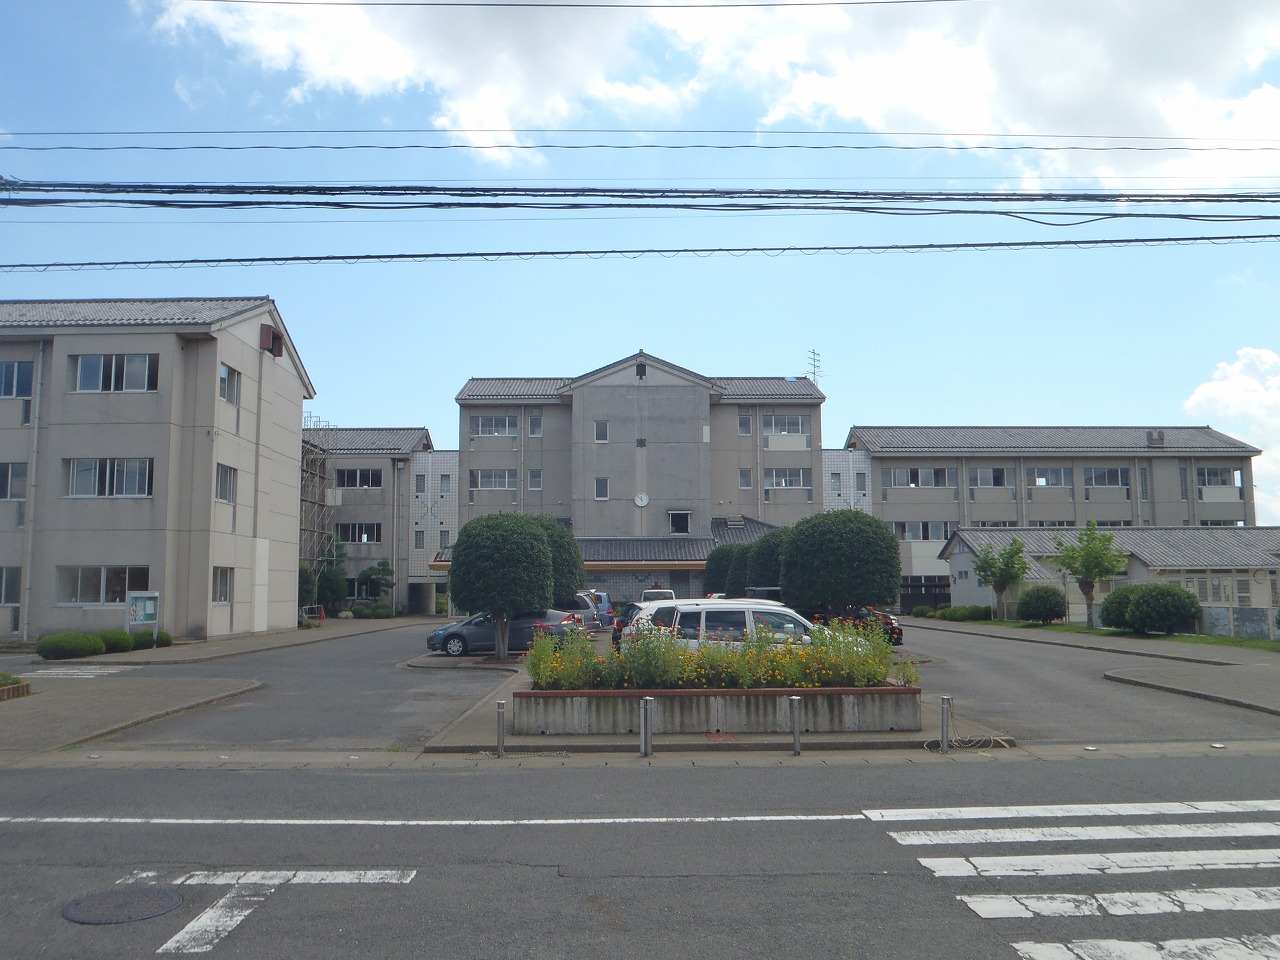 Primary school. Hitachinaka 690m to stand outfield elementary school (elementary school)